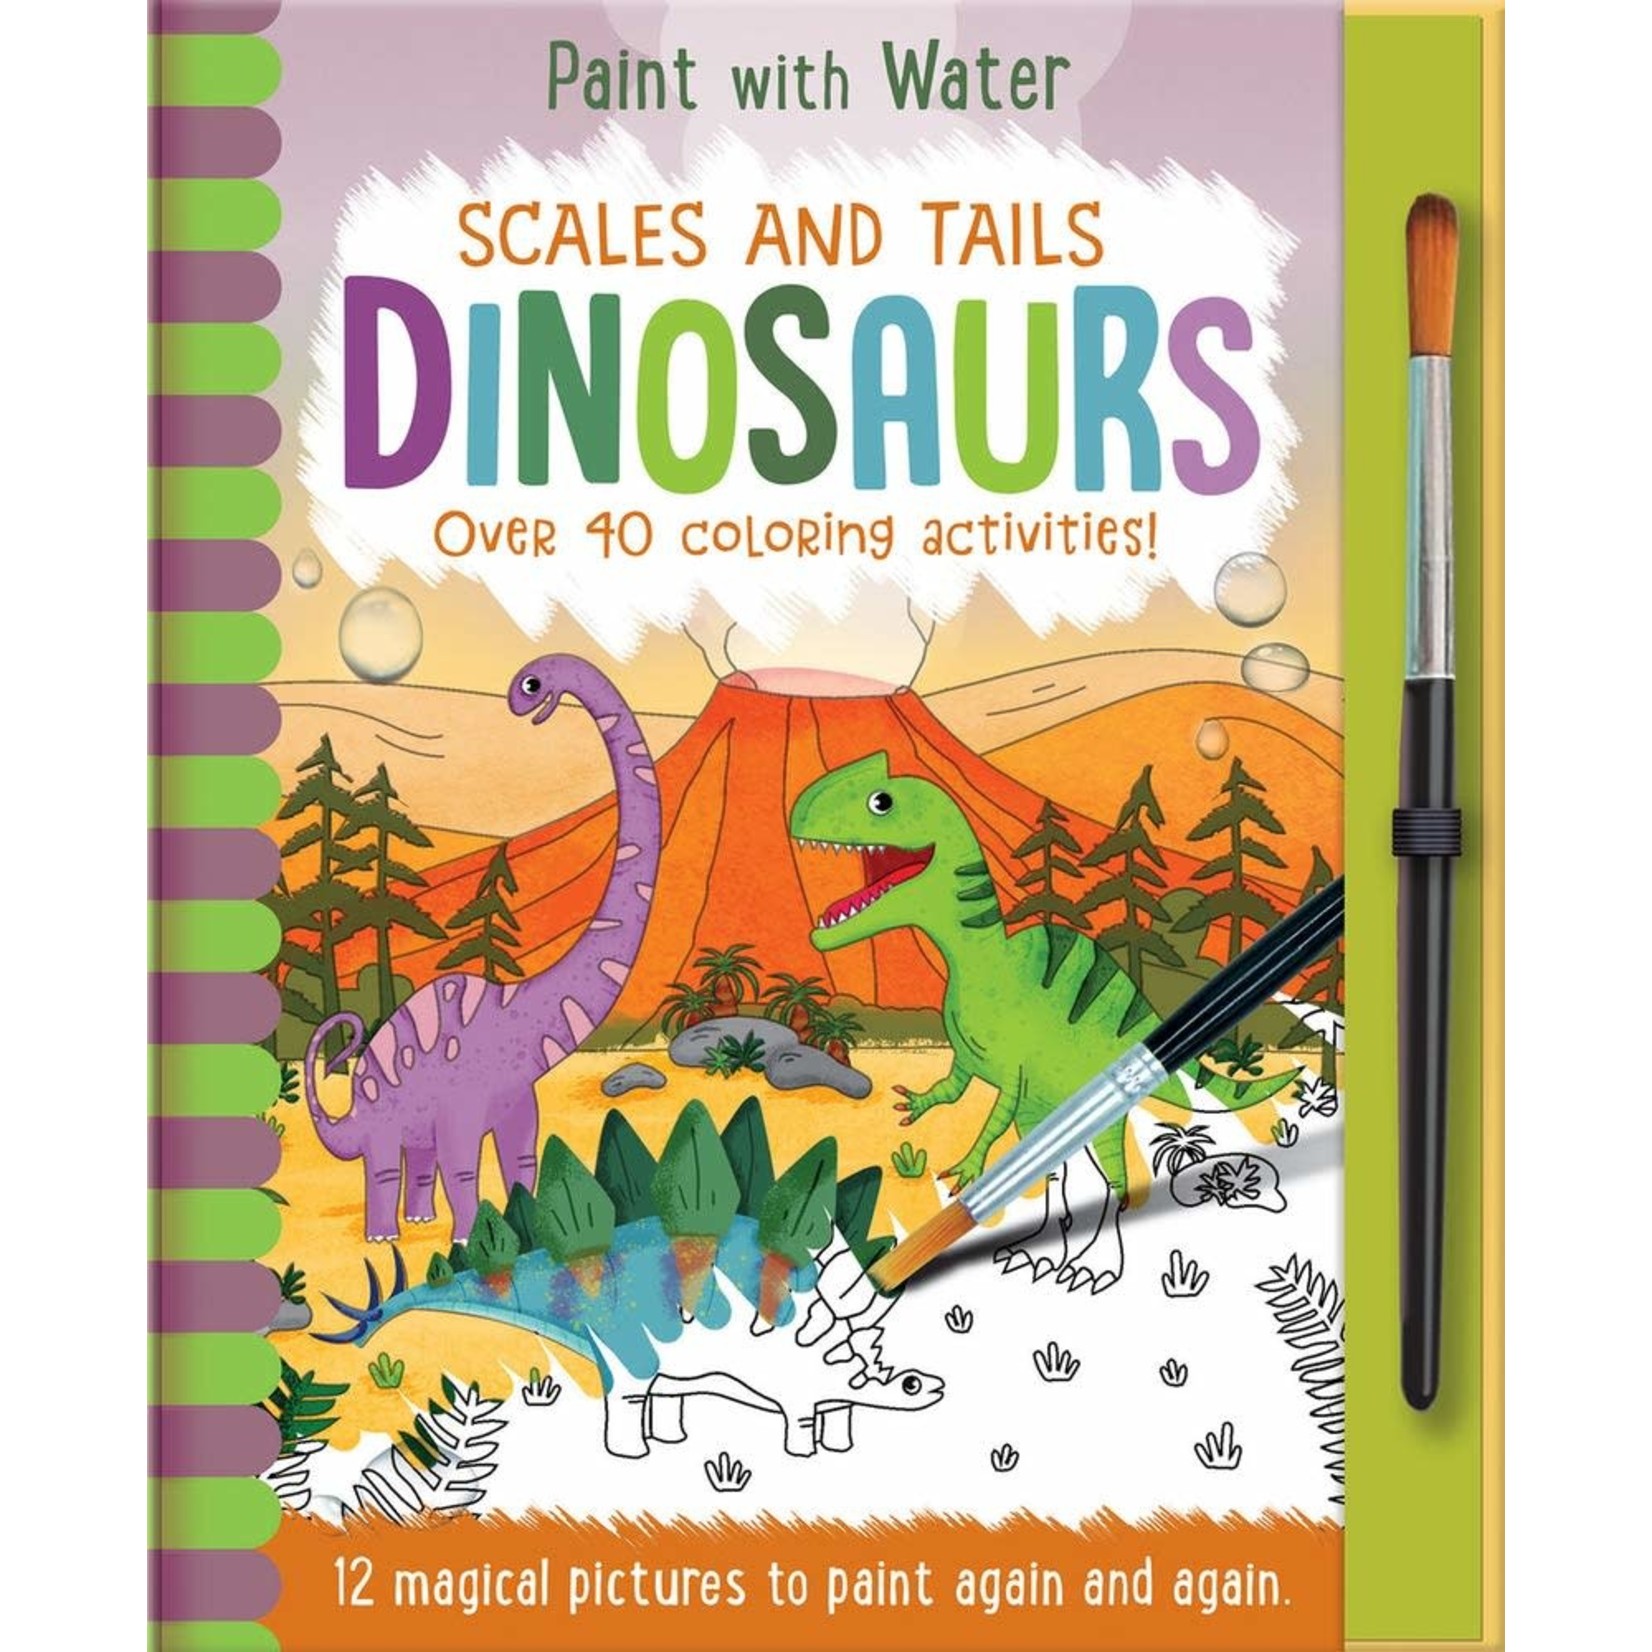 Paint with Water Dinosaurs - Kicks and Giggles